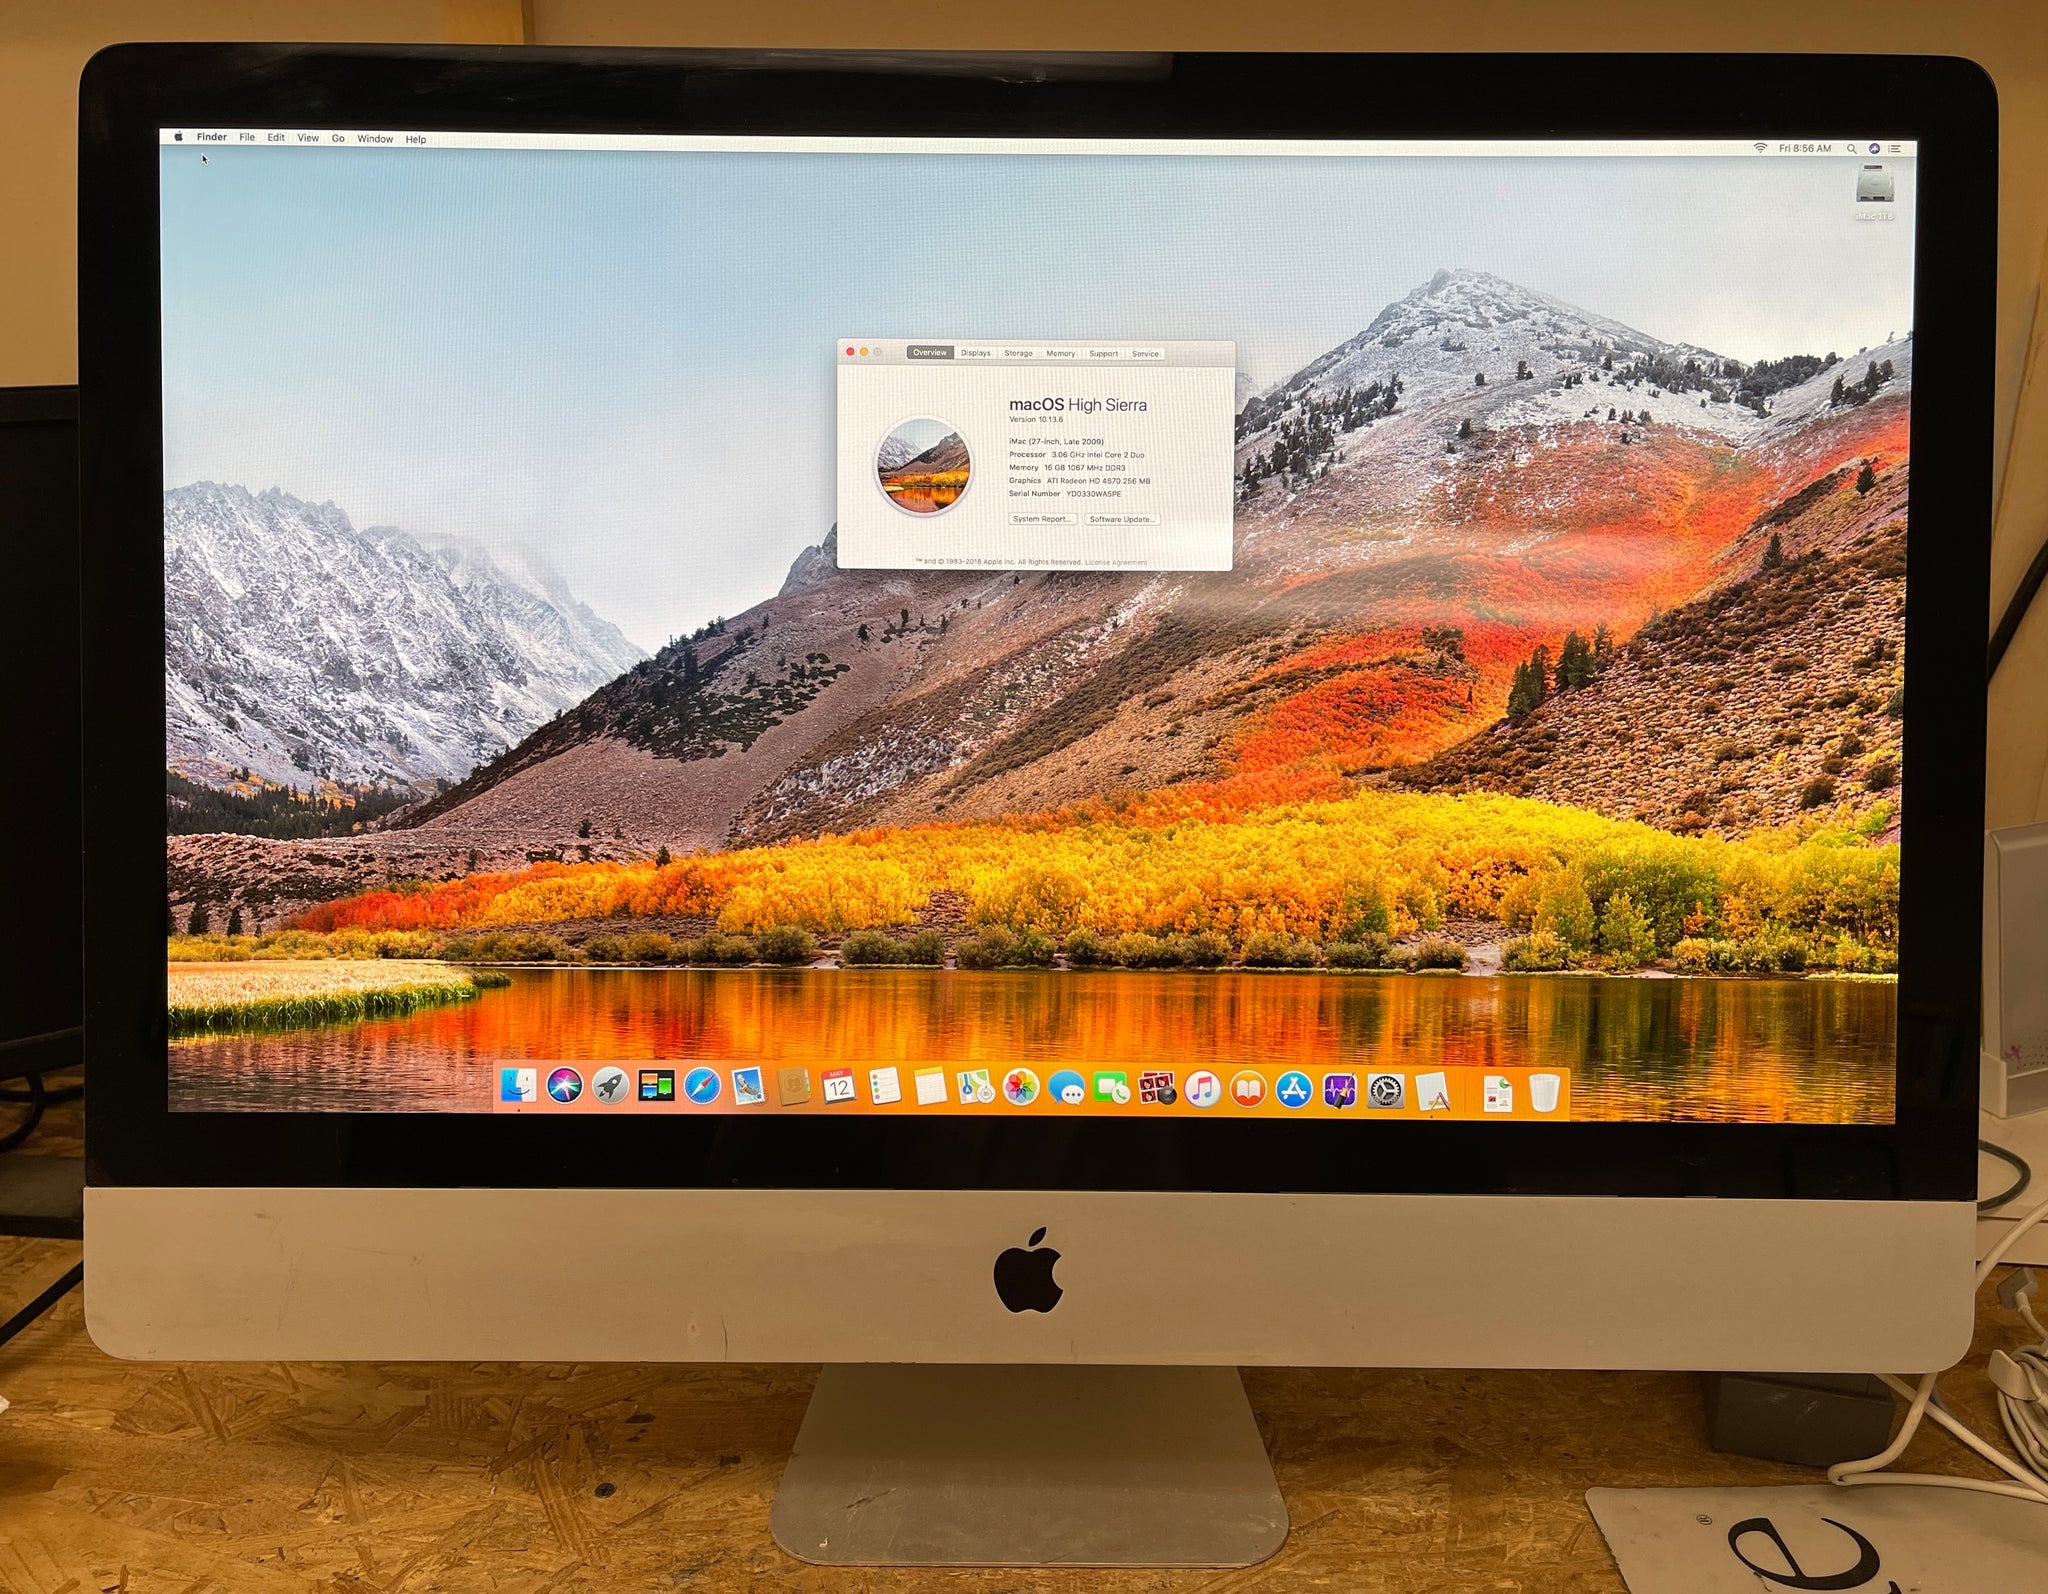 Apple iMac 27-inch Late 2009 3.06GHz Intel Core 2 Duo (MB952LL/A